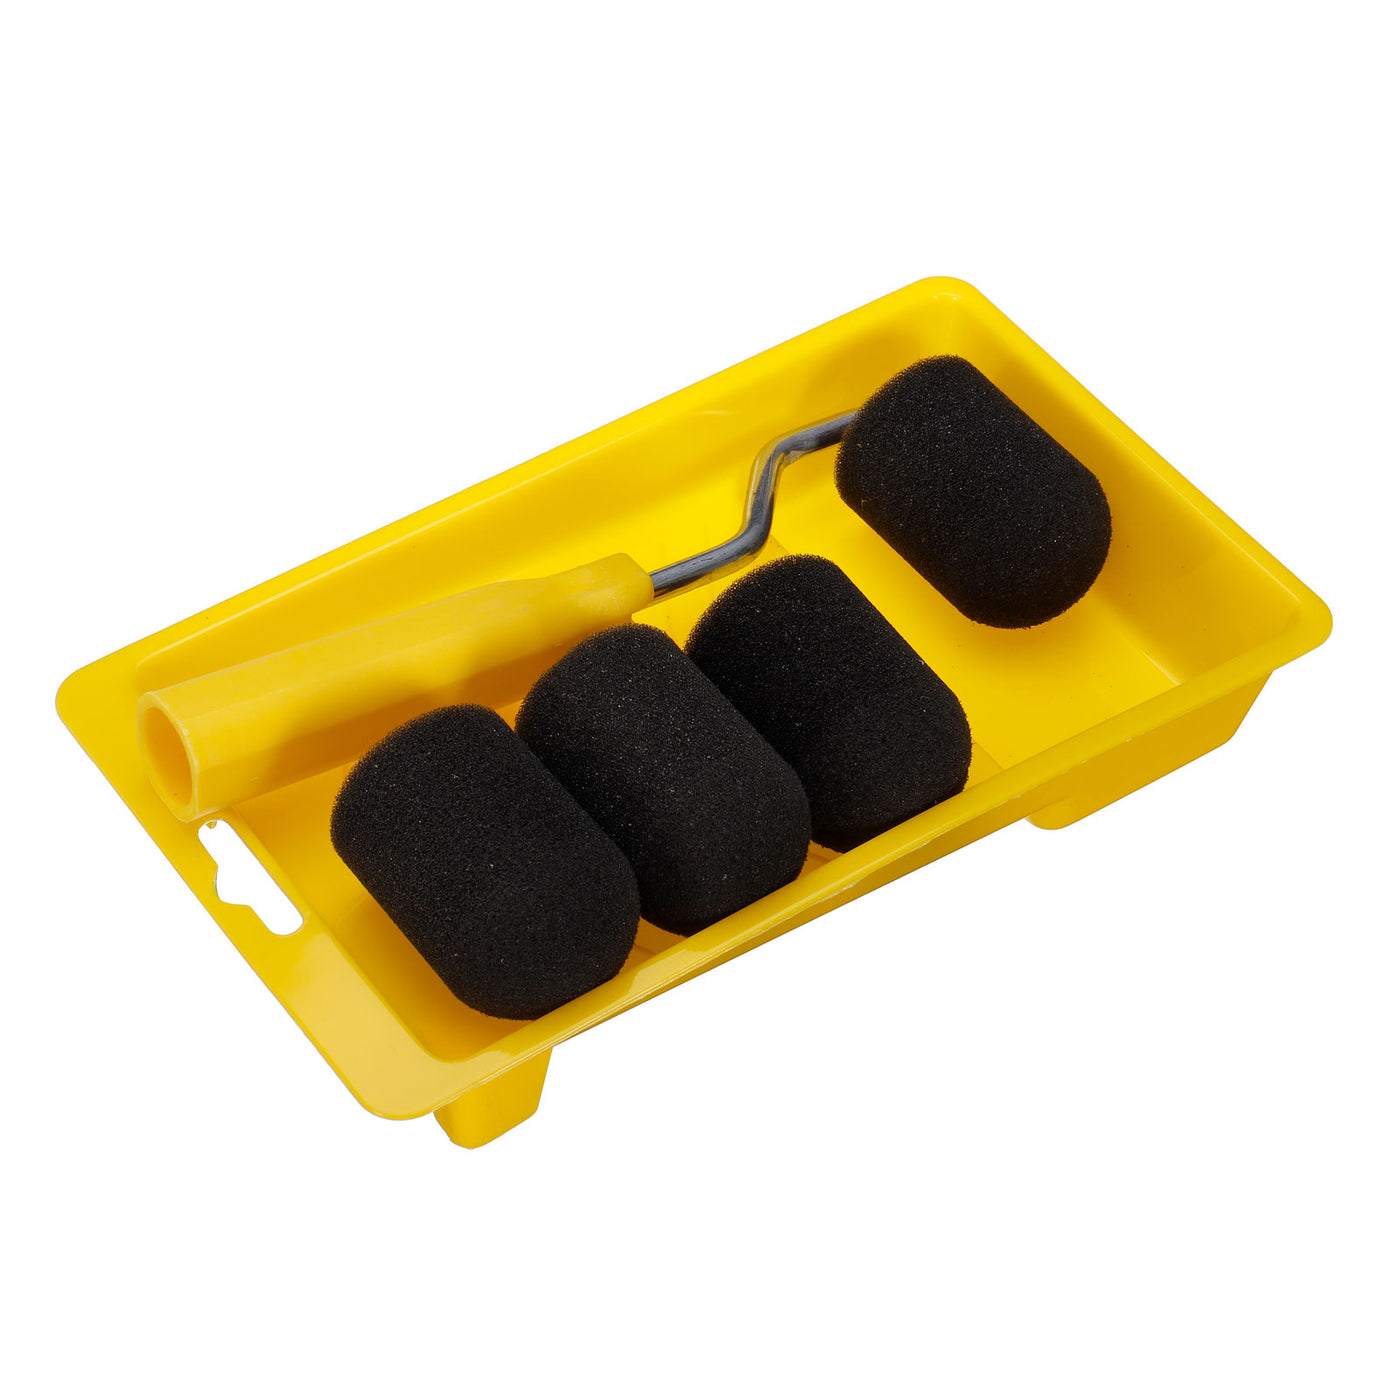 uxcell Uxcell 6Pcs Paint Roller Kit, 2" Black Water-Based Foam Paint Rollers, Tray, 20cm Frame